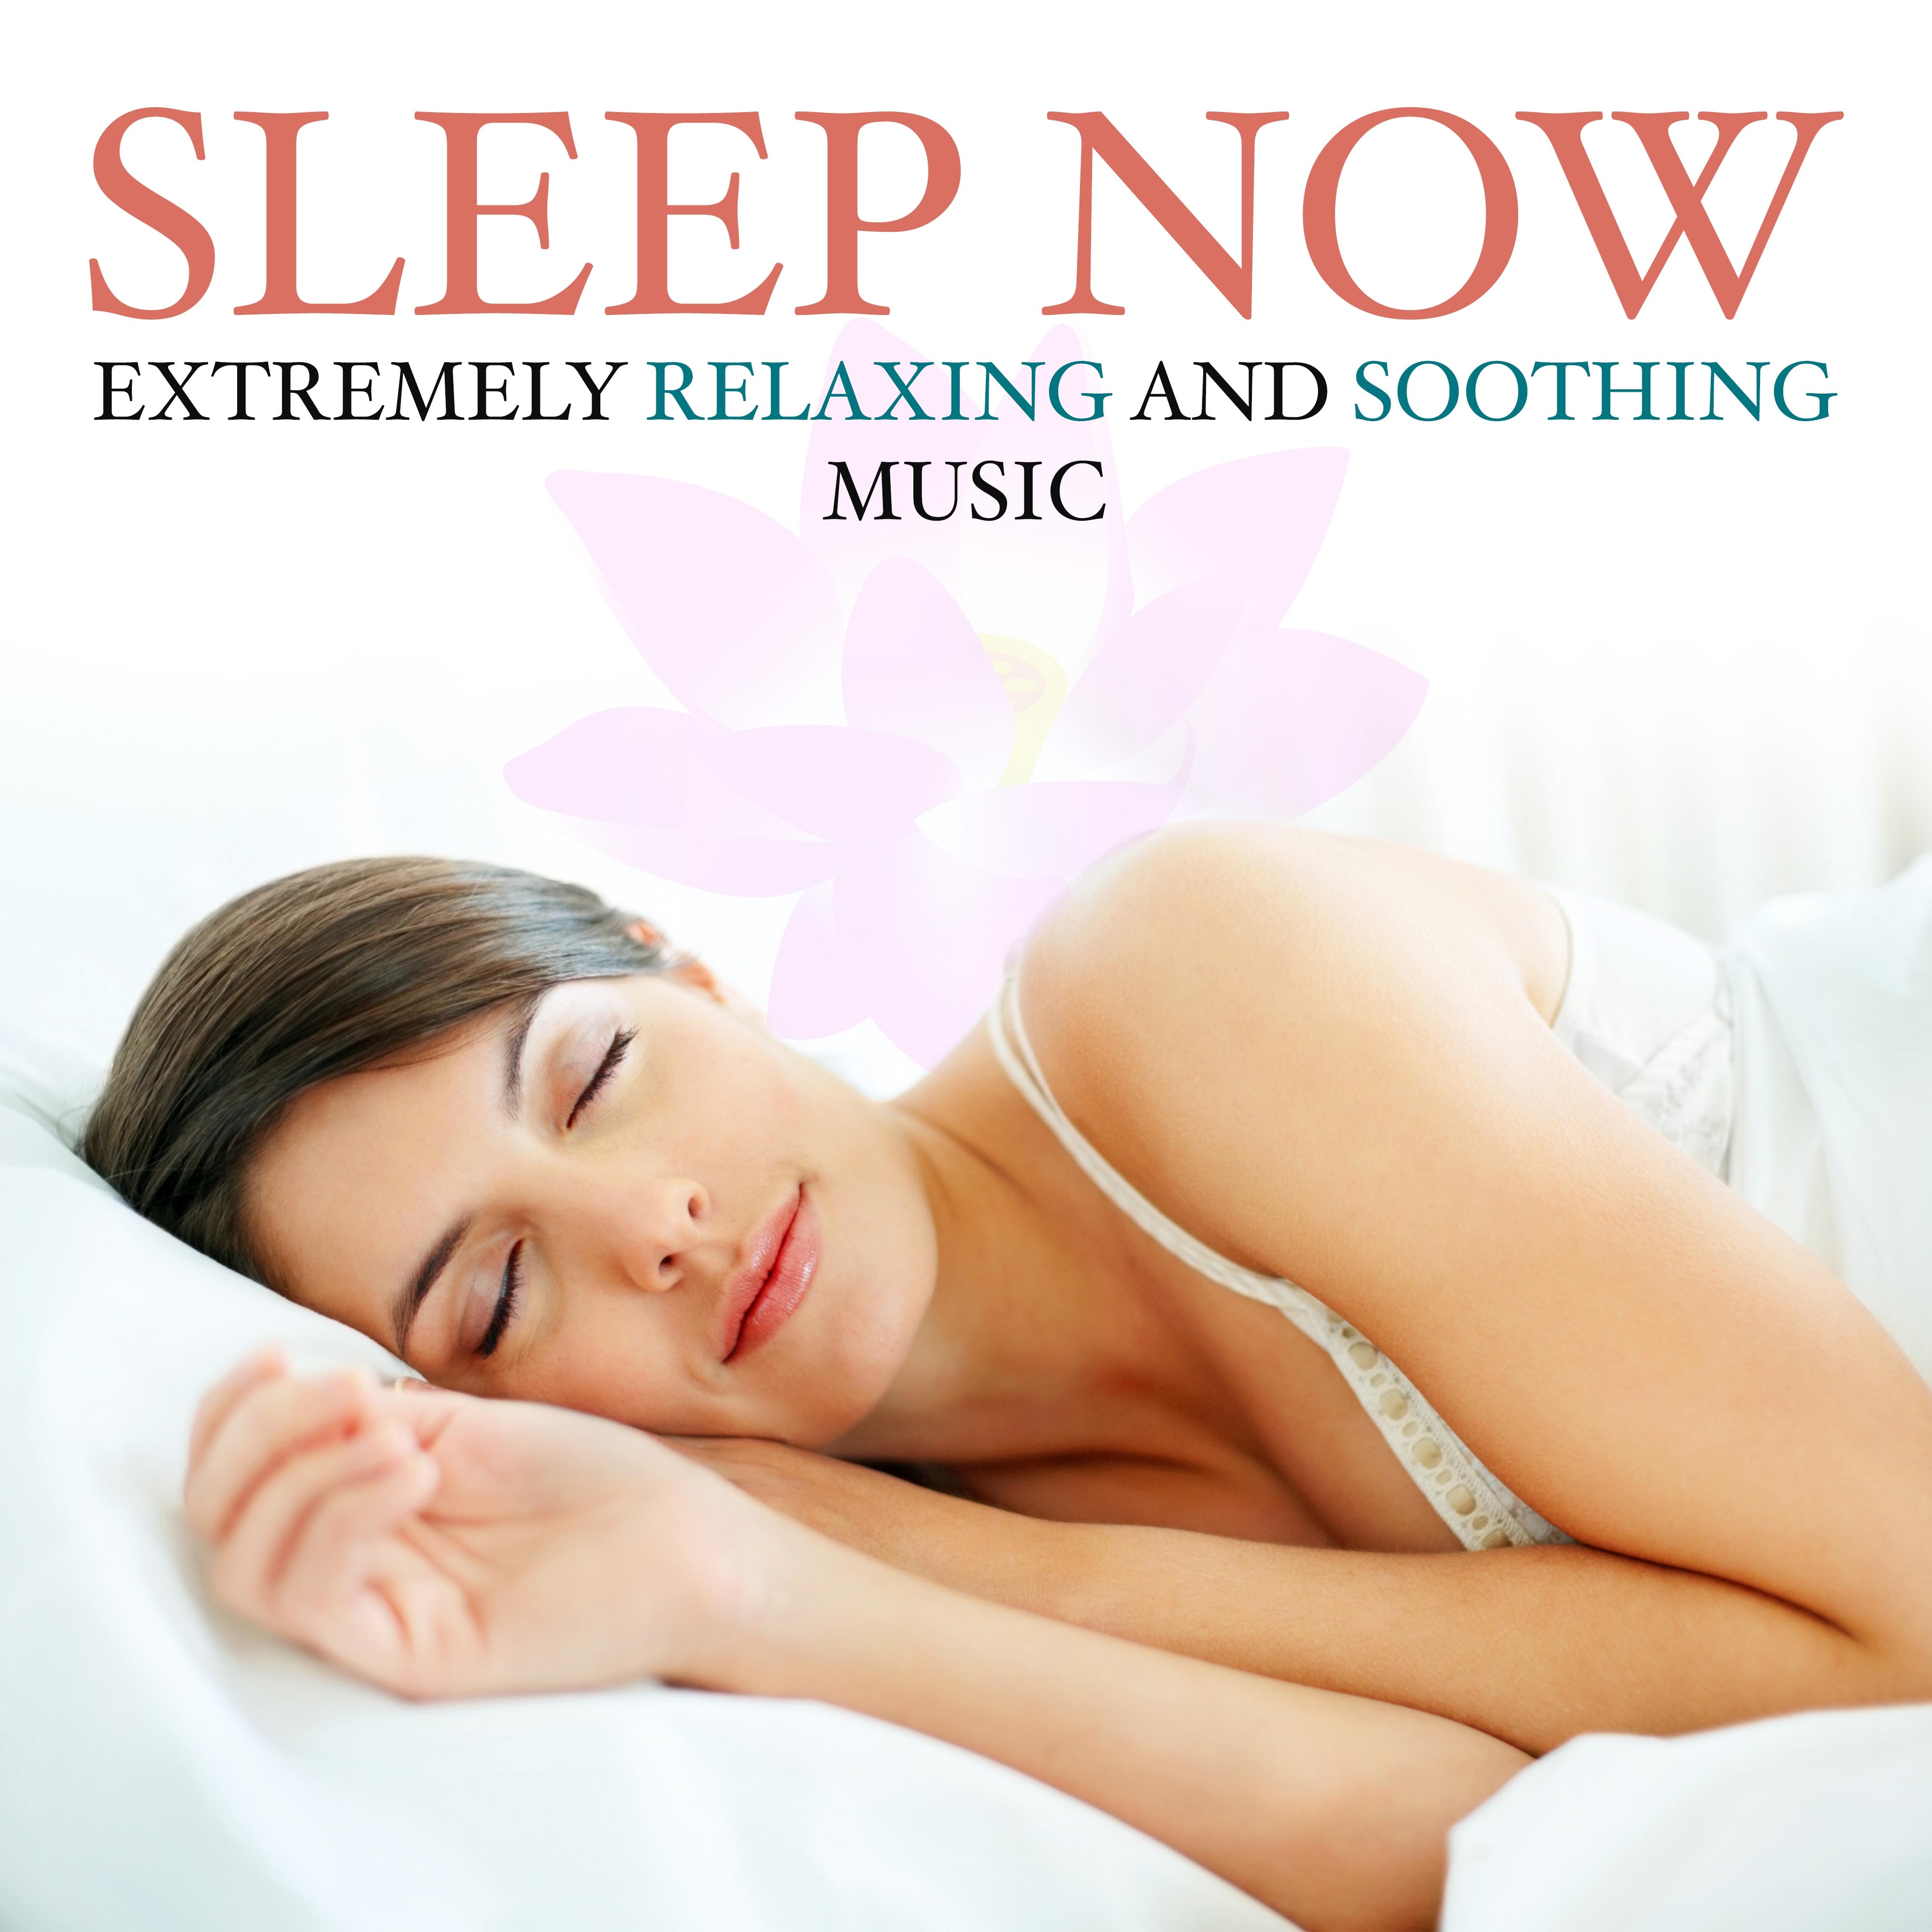 Sleep Now - Extremely Relaxing and Soothing Music for a Deep Brain Stimulation to help you Fall Asleep